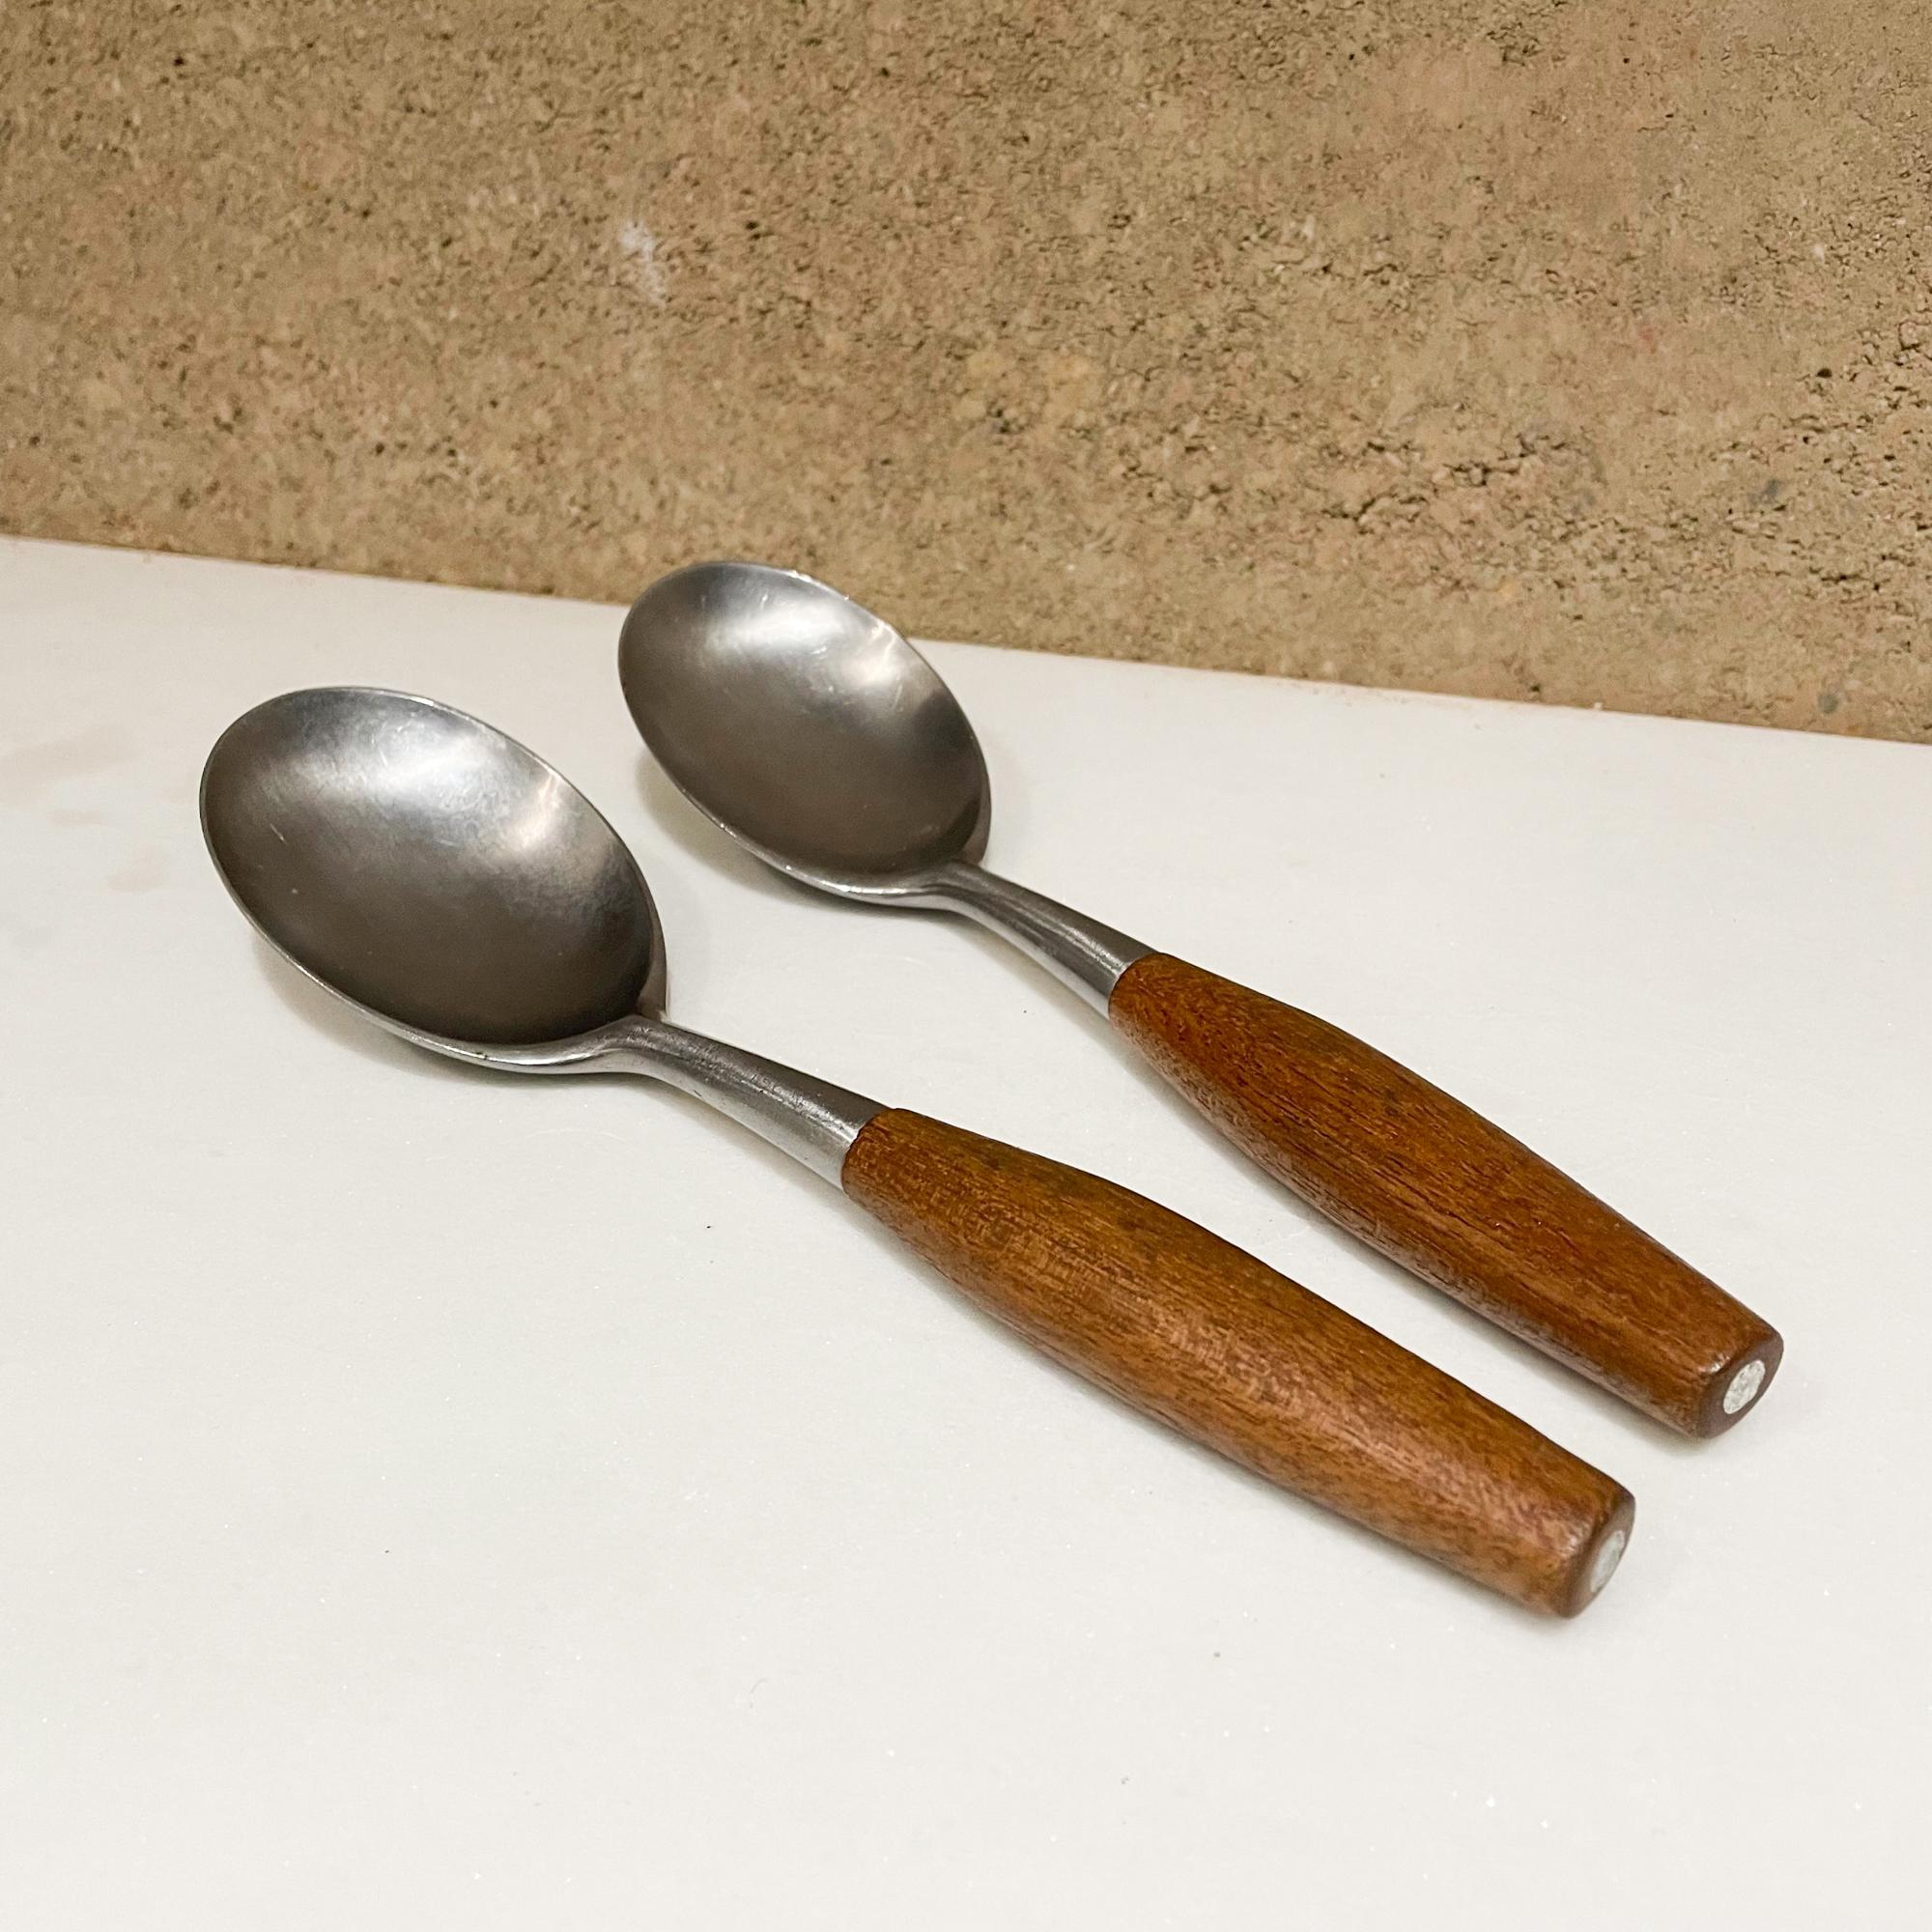 Two Large Spoons
Dansk IHQ Fjord Designs from Germany by Jens Quistgaard designed in 1954
Maker stamped.
Original unrestored preowned use vintage condition.. see all images please.
Designed in Teak Wood and Stainless Steel.
Measures: 9L x 2.38 W